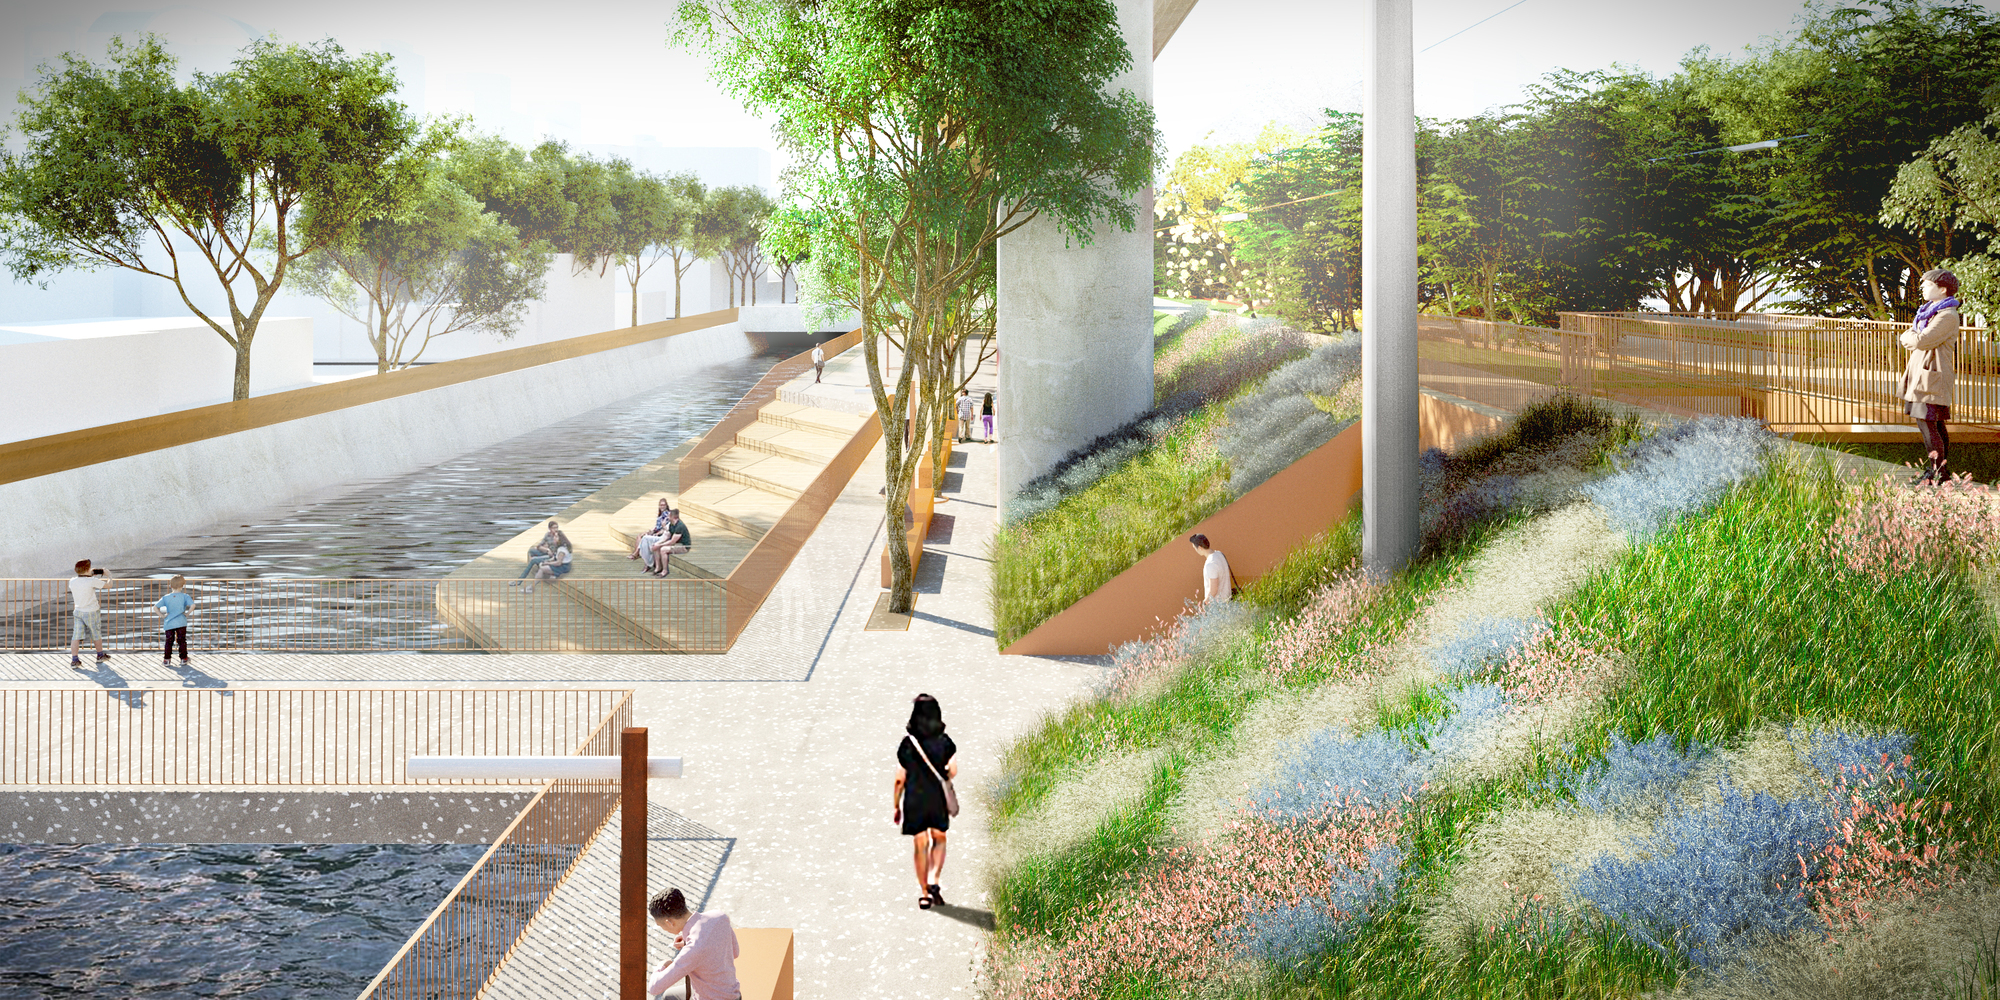 An abandoned train track is transformed into a linear park